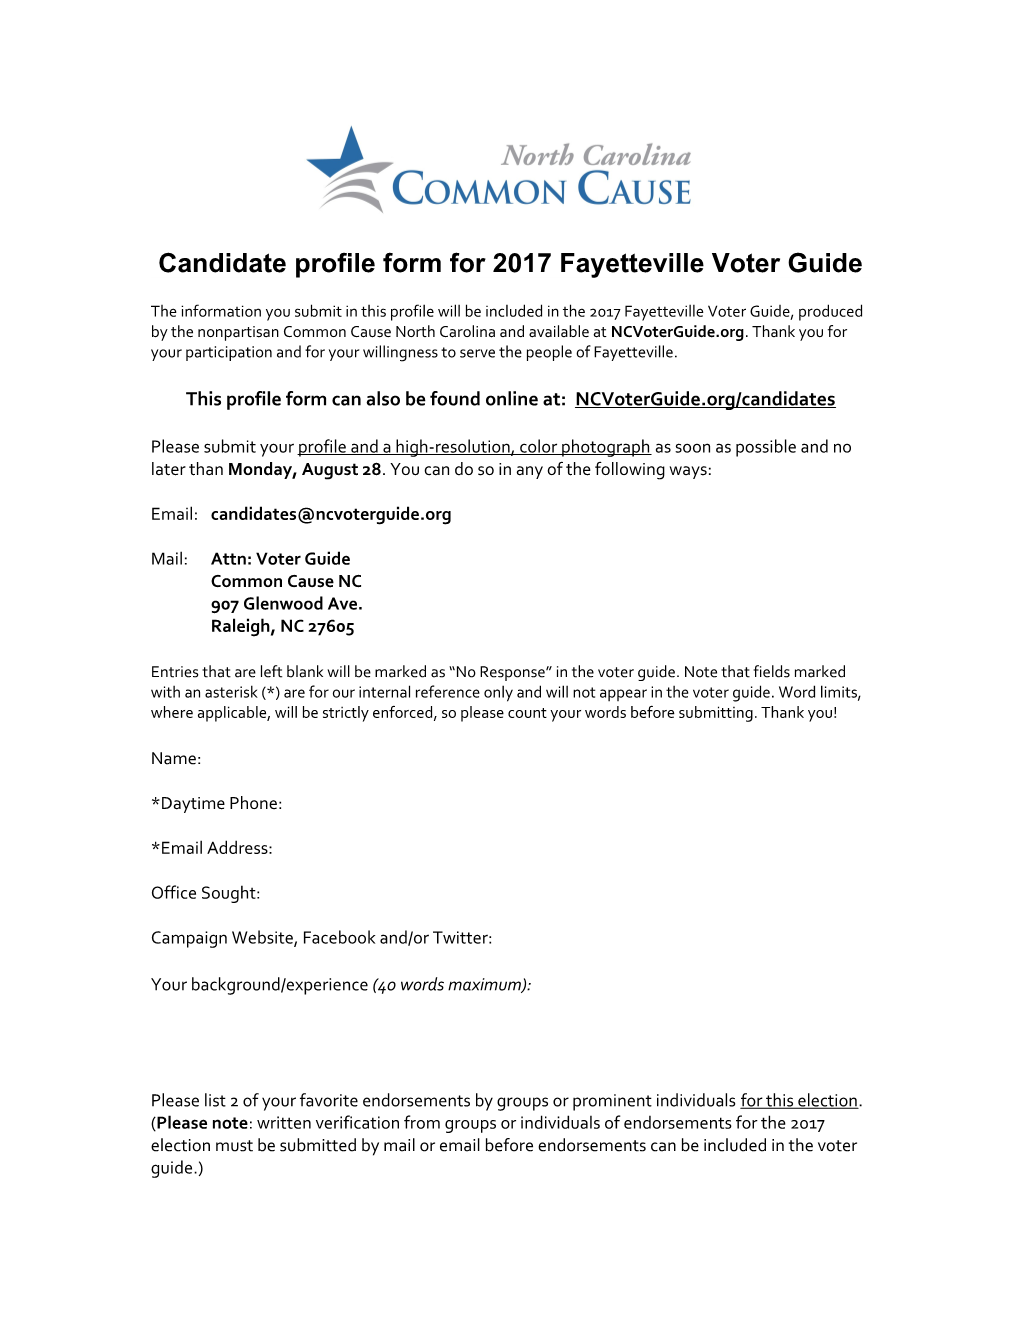 Candidate Profile Form for 2017 Fayetteville Voter Guide